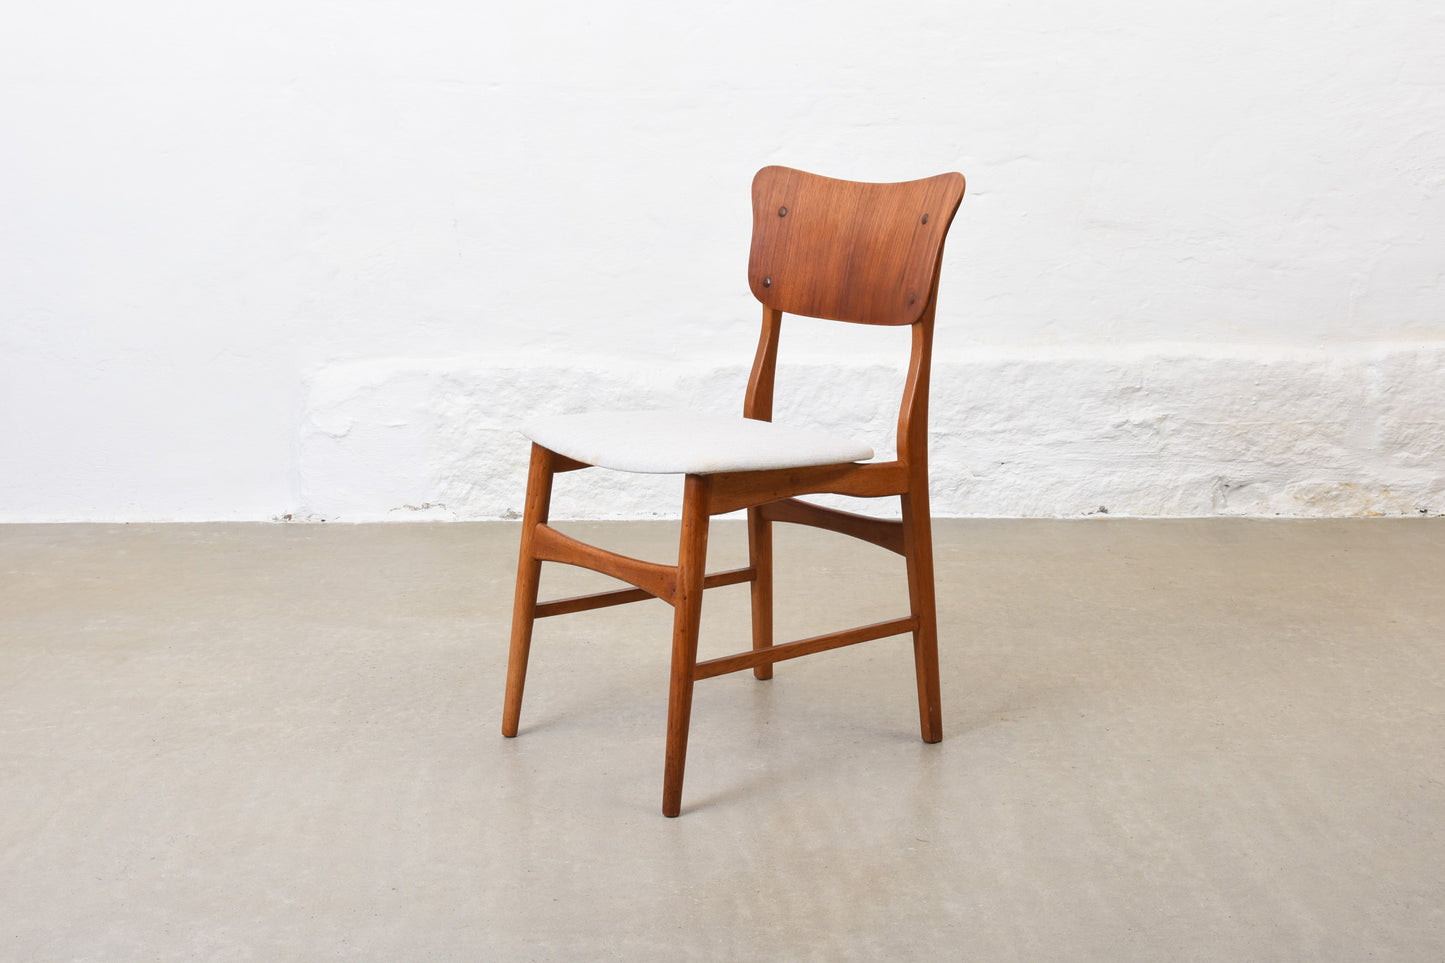 Newly reupholstered: Set of 1950s chairs in teak + oak